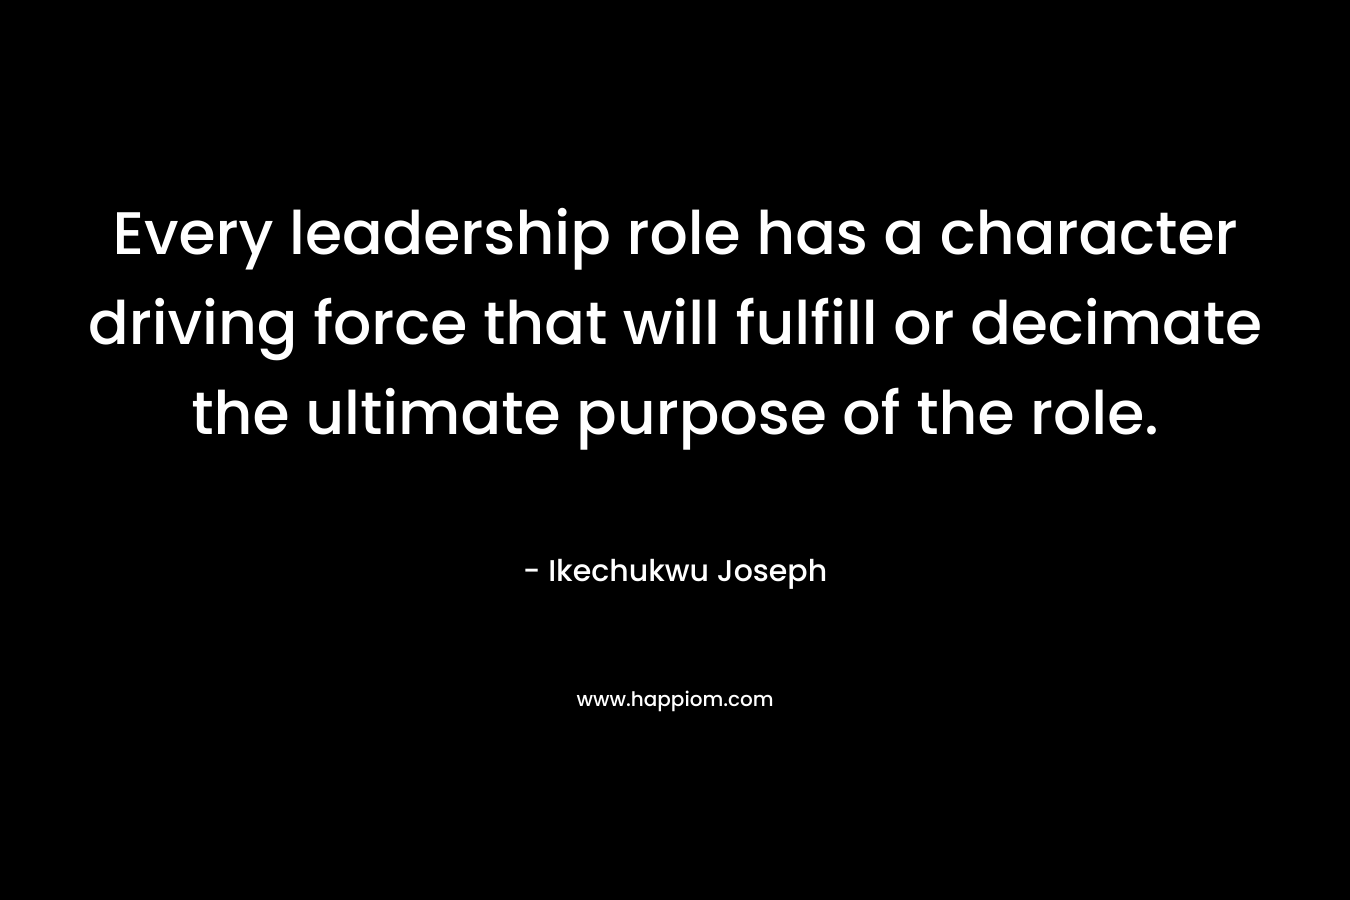 Every leadership role has a character driving force that will fulfill or decimate the ultimate purpose of the role.